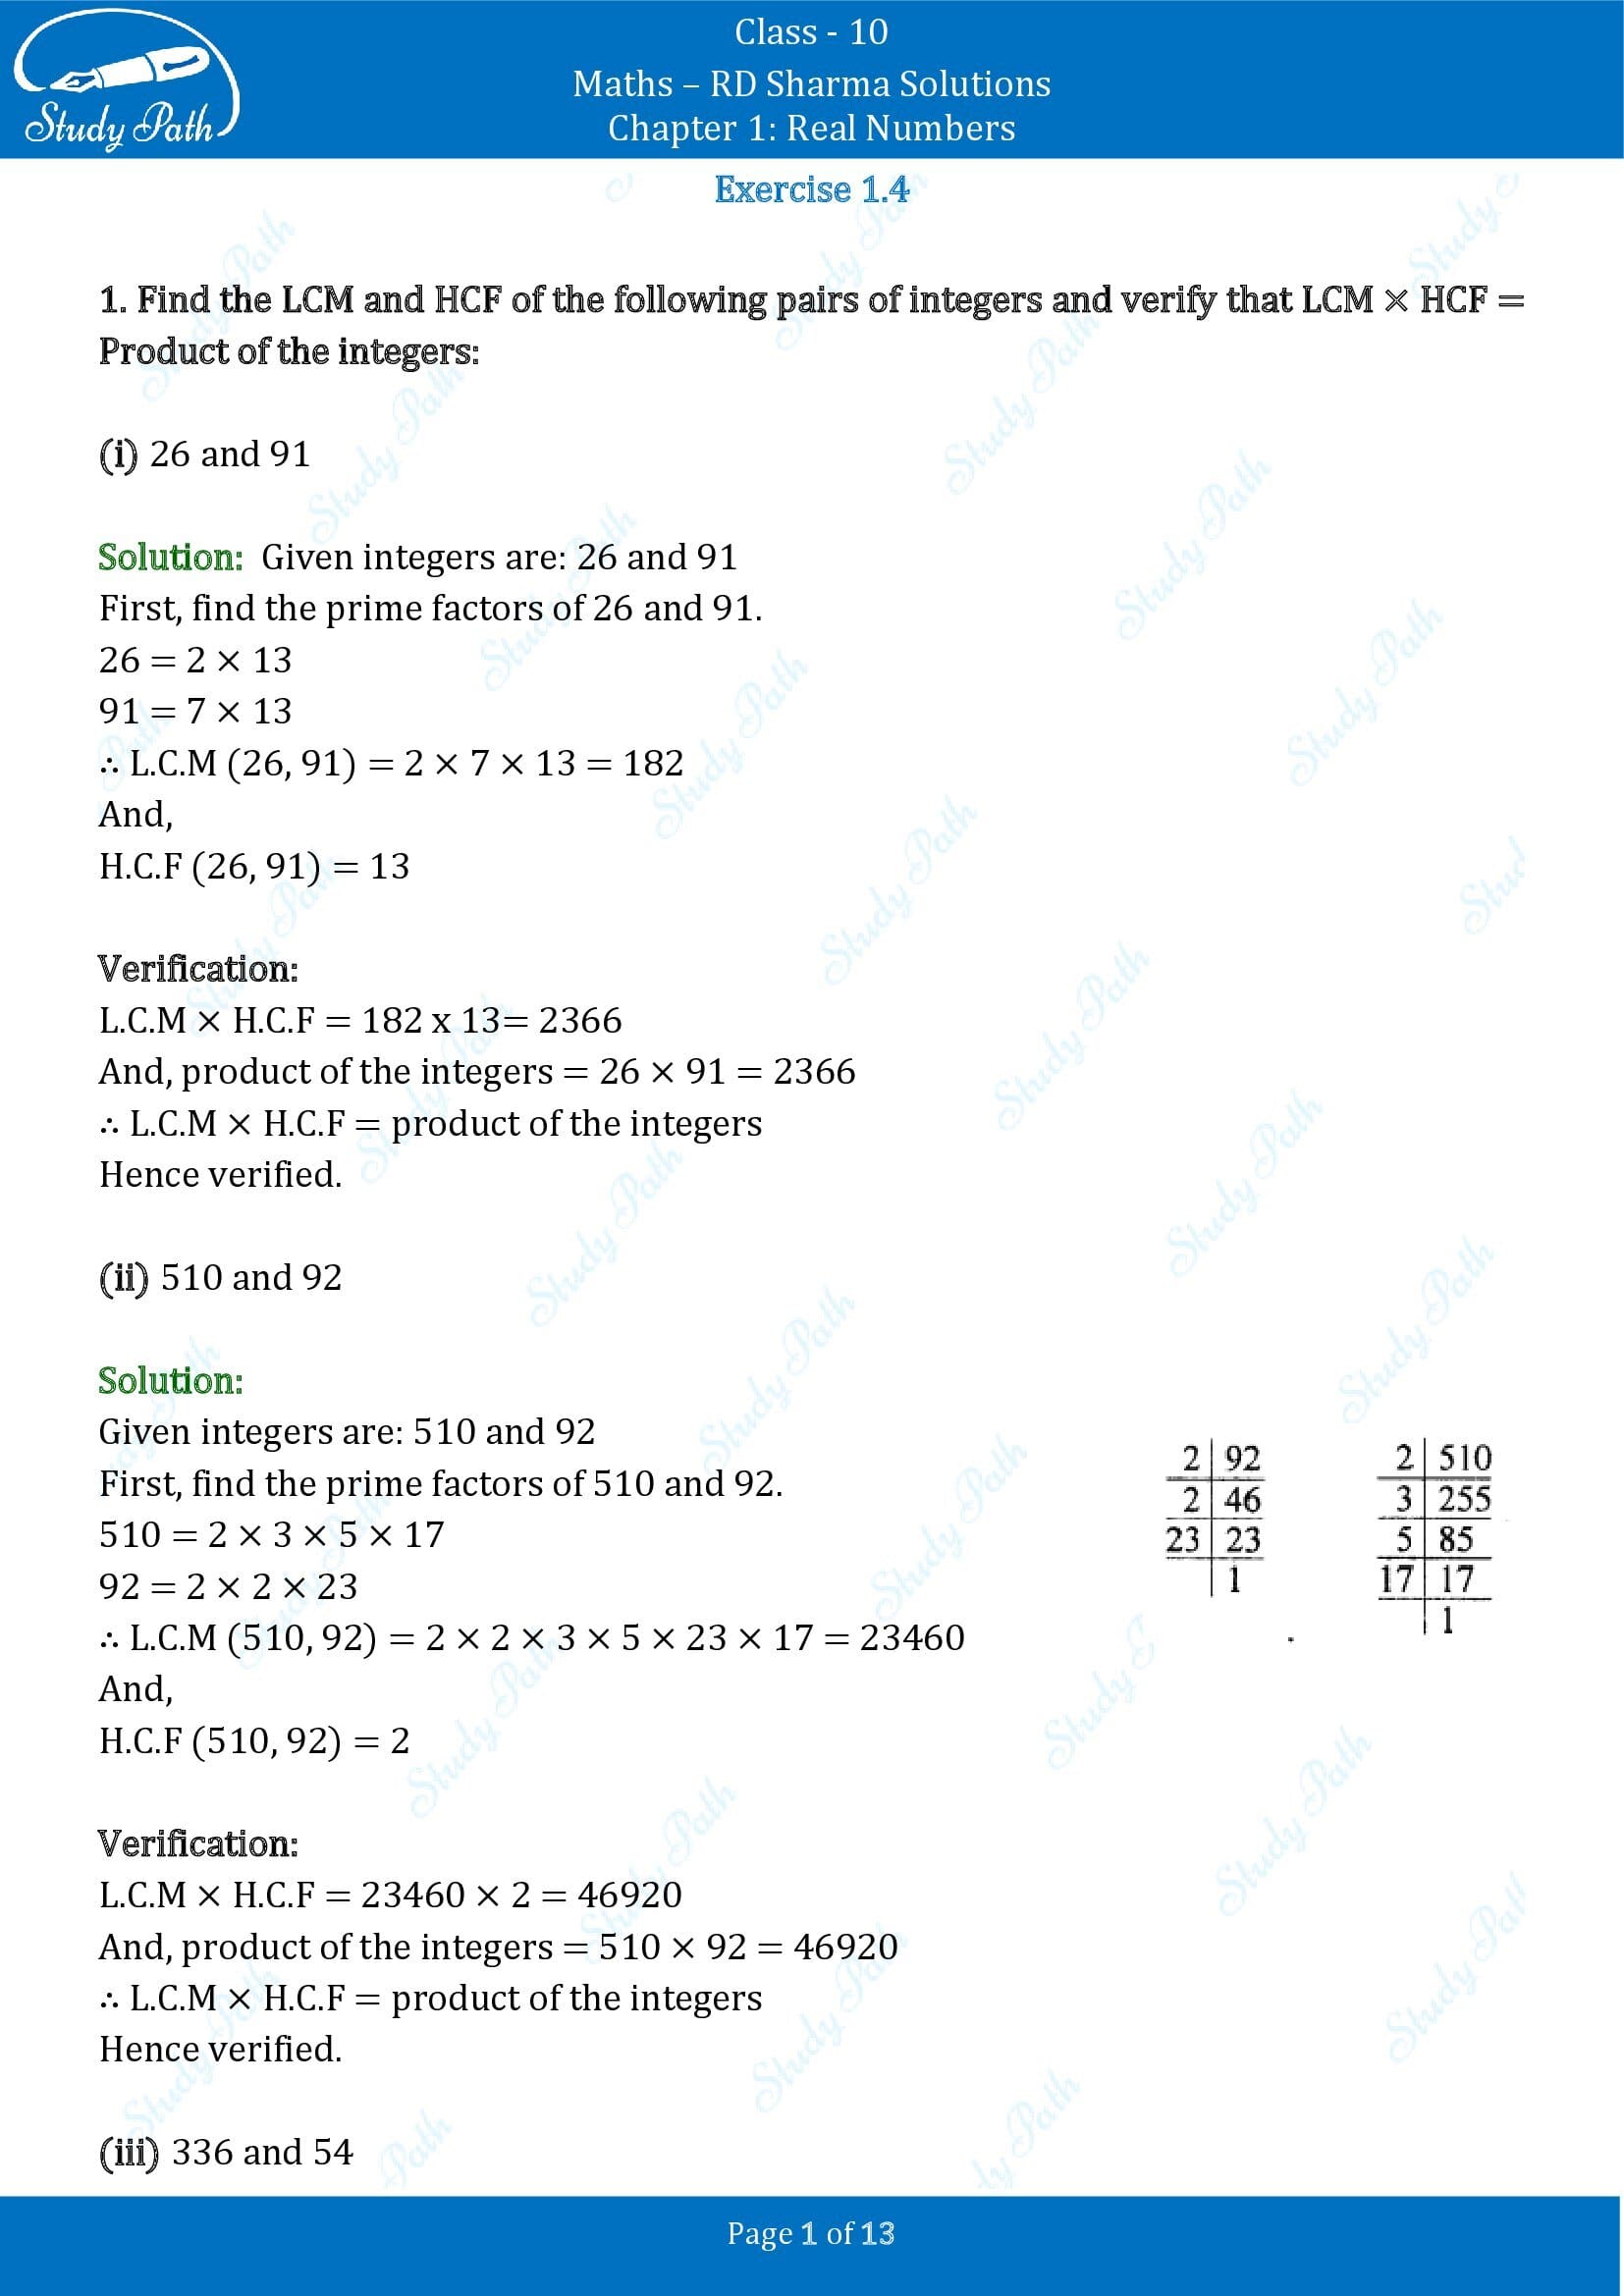 RD Sharma Solutions Class 10 Chapter 1 Real Numbers Exercise 1.4 00001